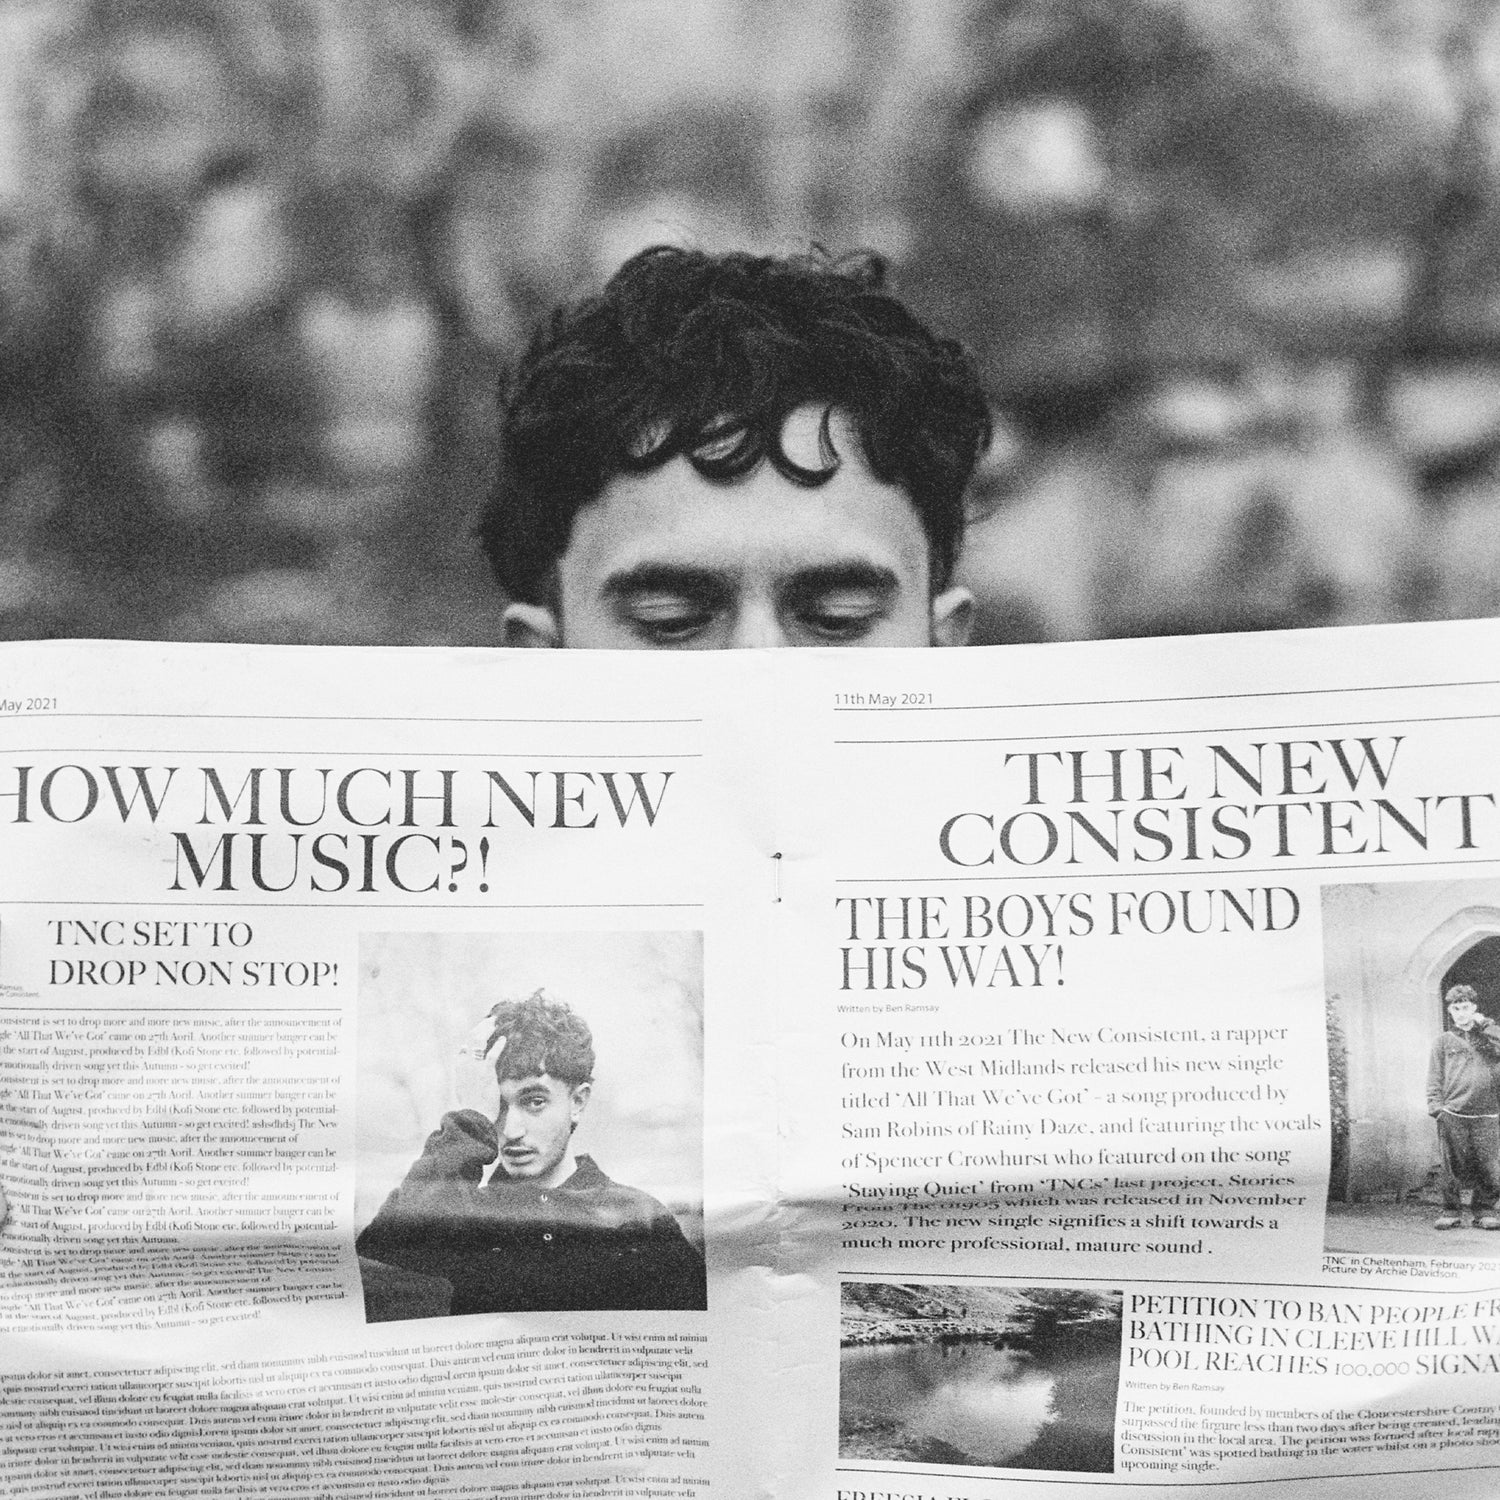 The New Consistent's newspaper campaign, taken by Archie Davidson in 2021.